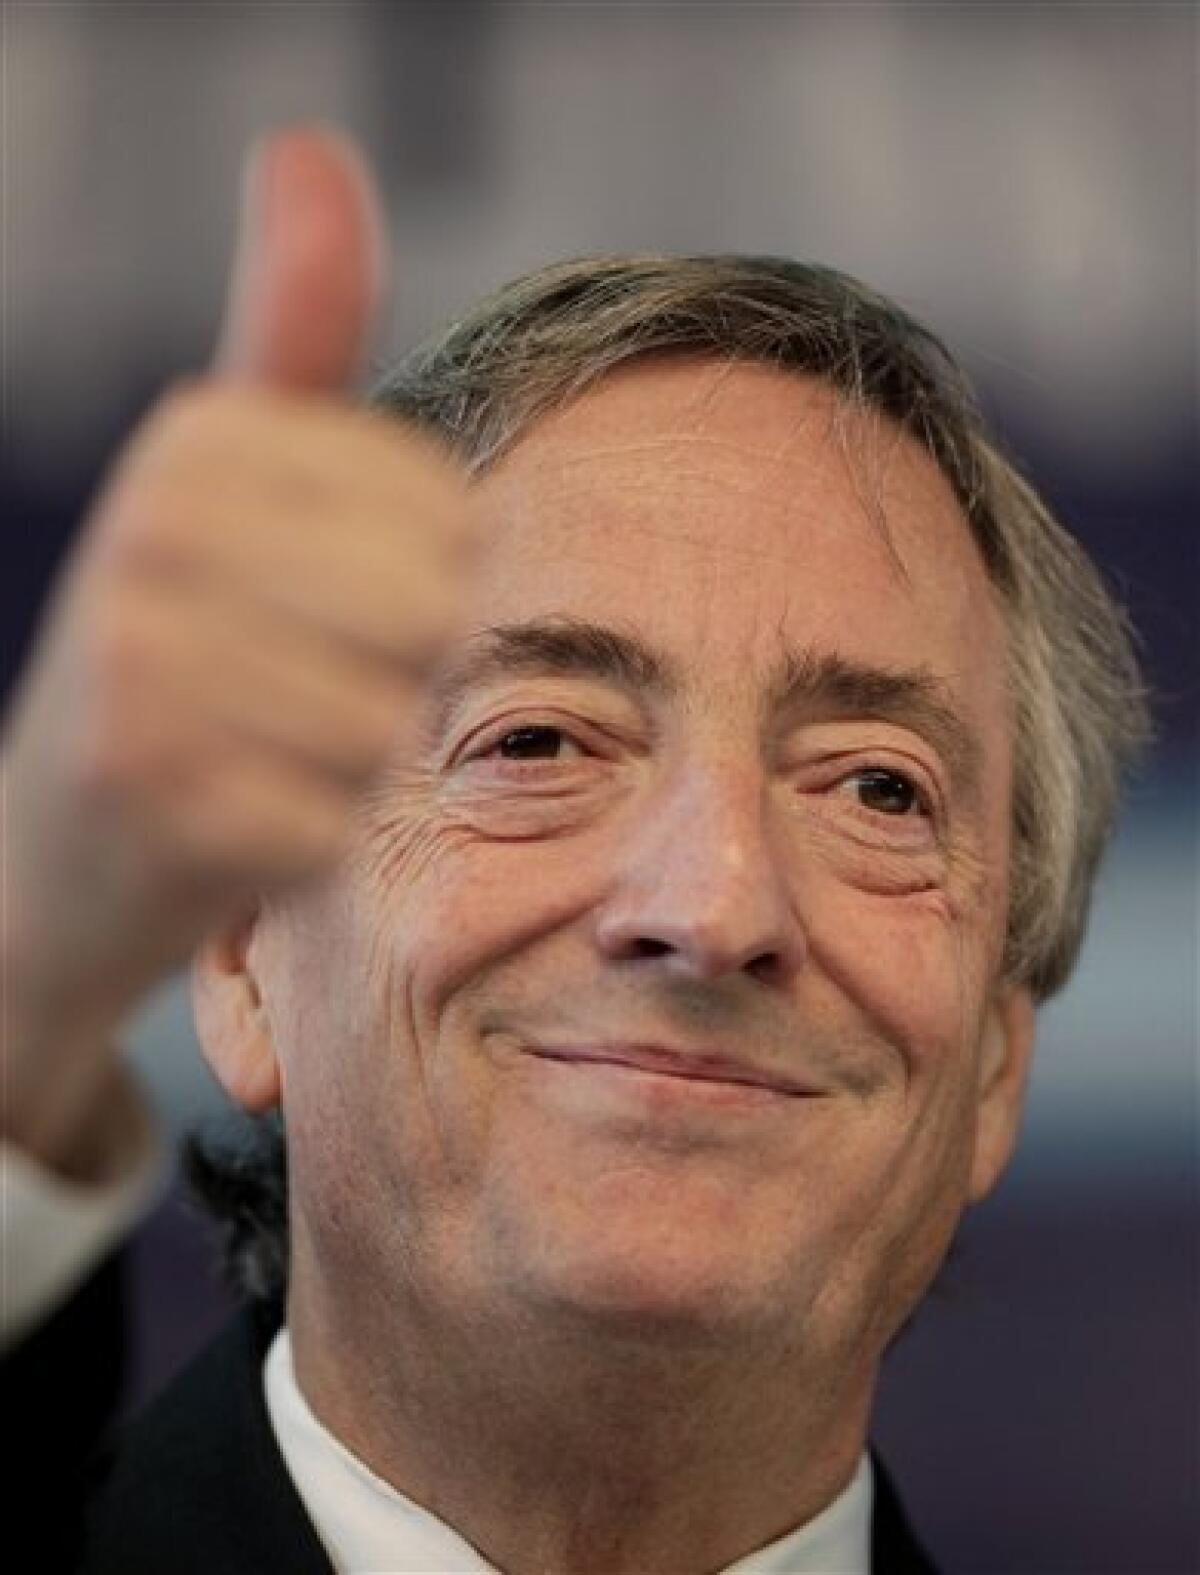 FILE - In this June 22, 2009 file photo, Argentina's former president Nestor Kirchner gestures at a campaign rally in Buenos Aires, Argentina. According to state television in Argentina, Nestor Kirchner died on Wednesday Oct. 27, 2010 of a heart attack at age 60. (AP Photo/Natacha Pisarenko, File)